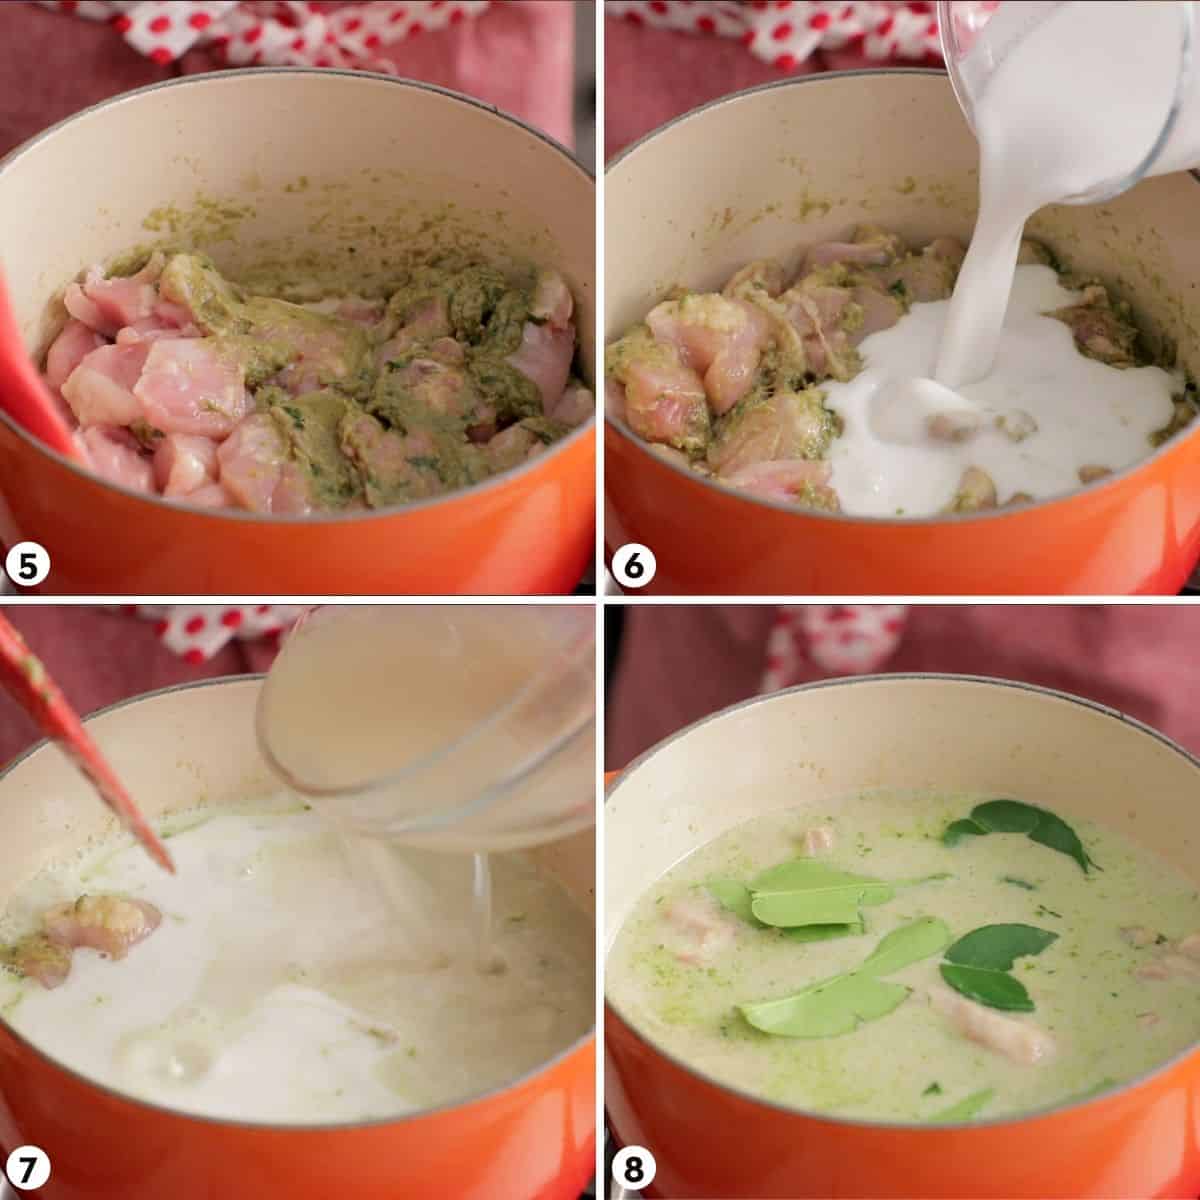 Steps for making green curry chicken steps 5-8